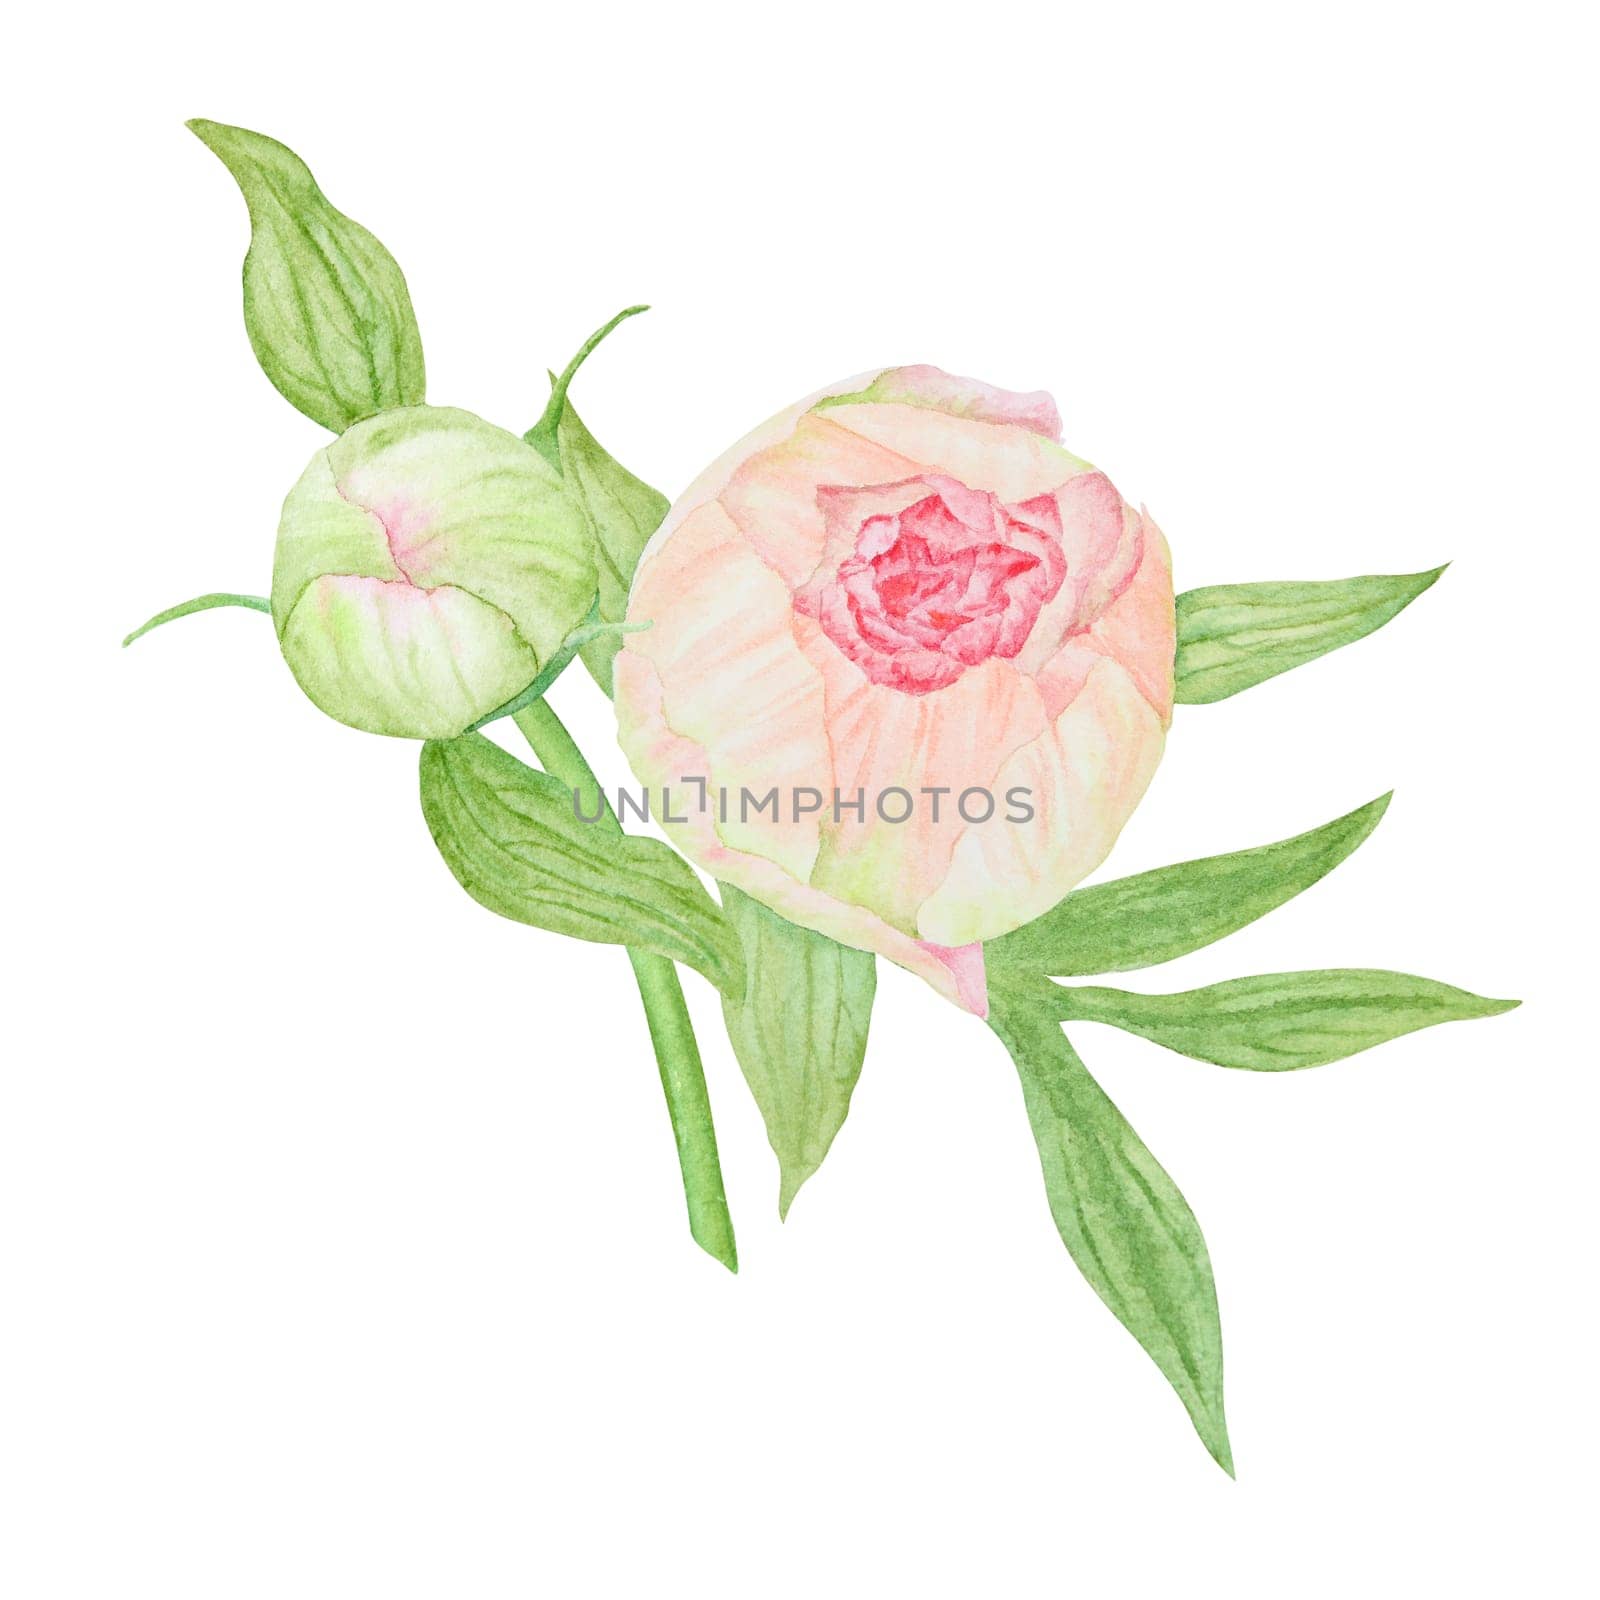 Peach peony bouquet watercolor hand drawn painting. Chinese national symbol illustration. Realistic flower clipart, floral arrangement for card design, wedding invitation, prints, textile, packing by florainlove_art